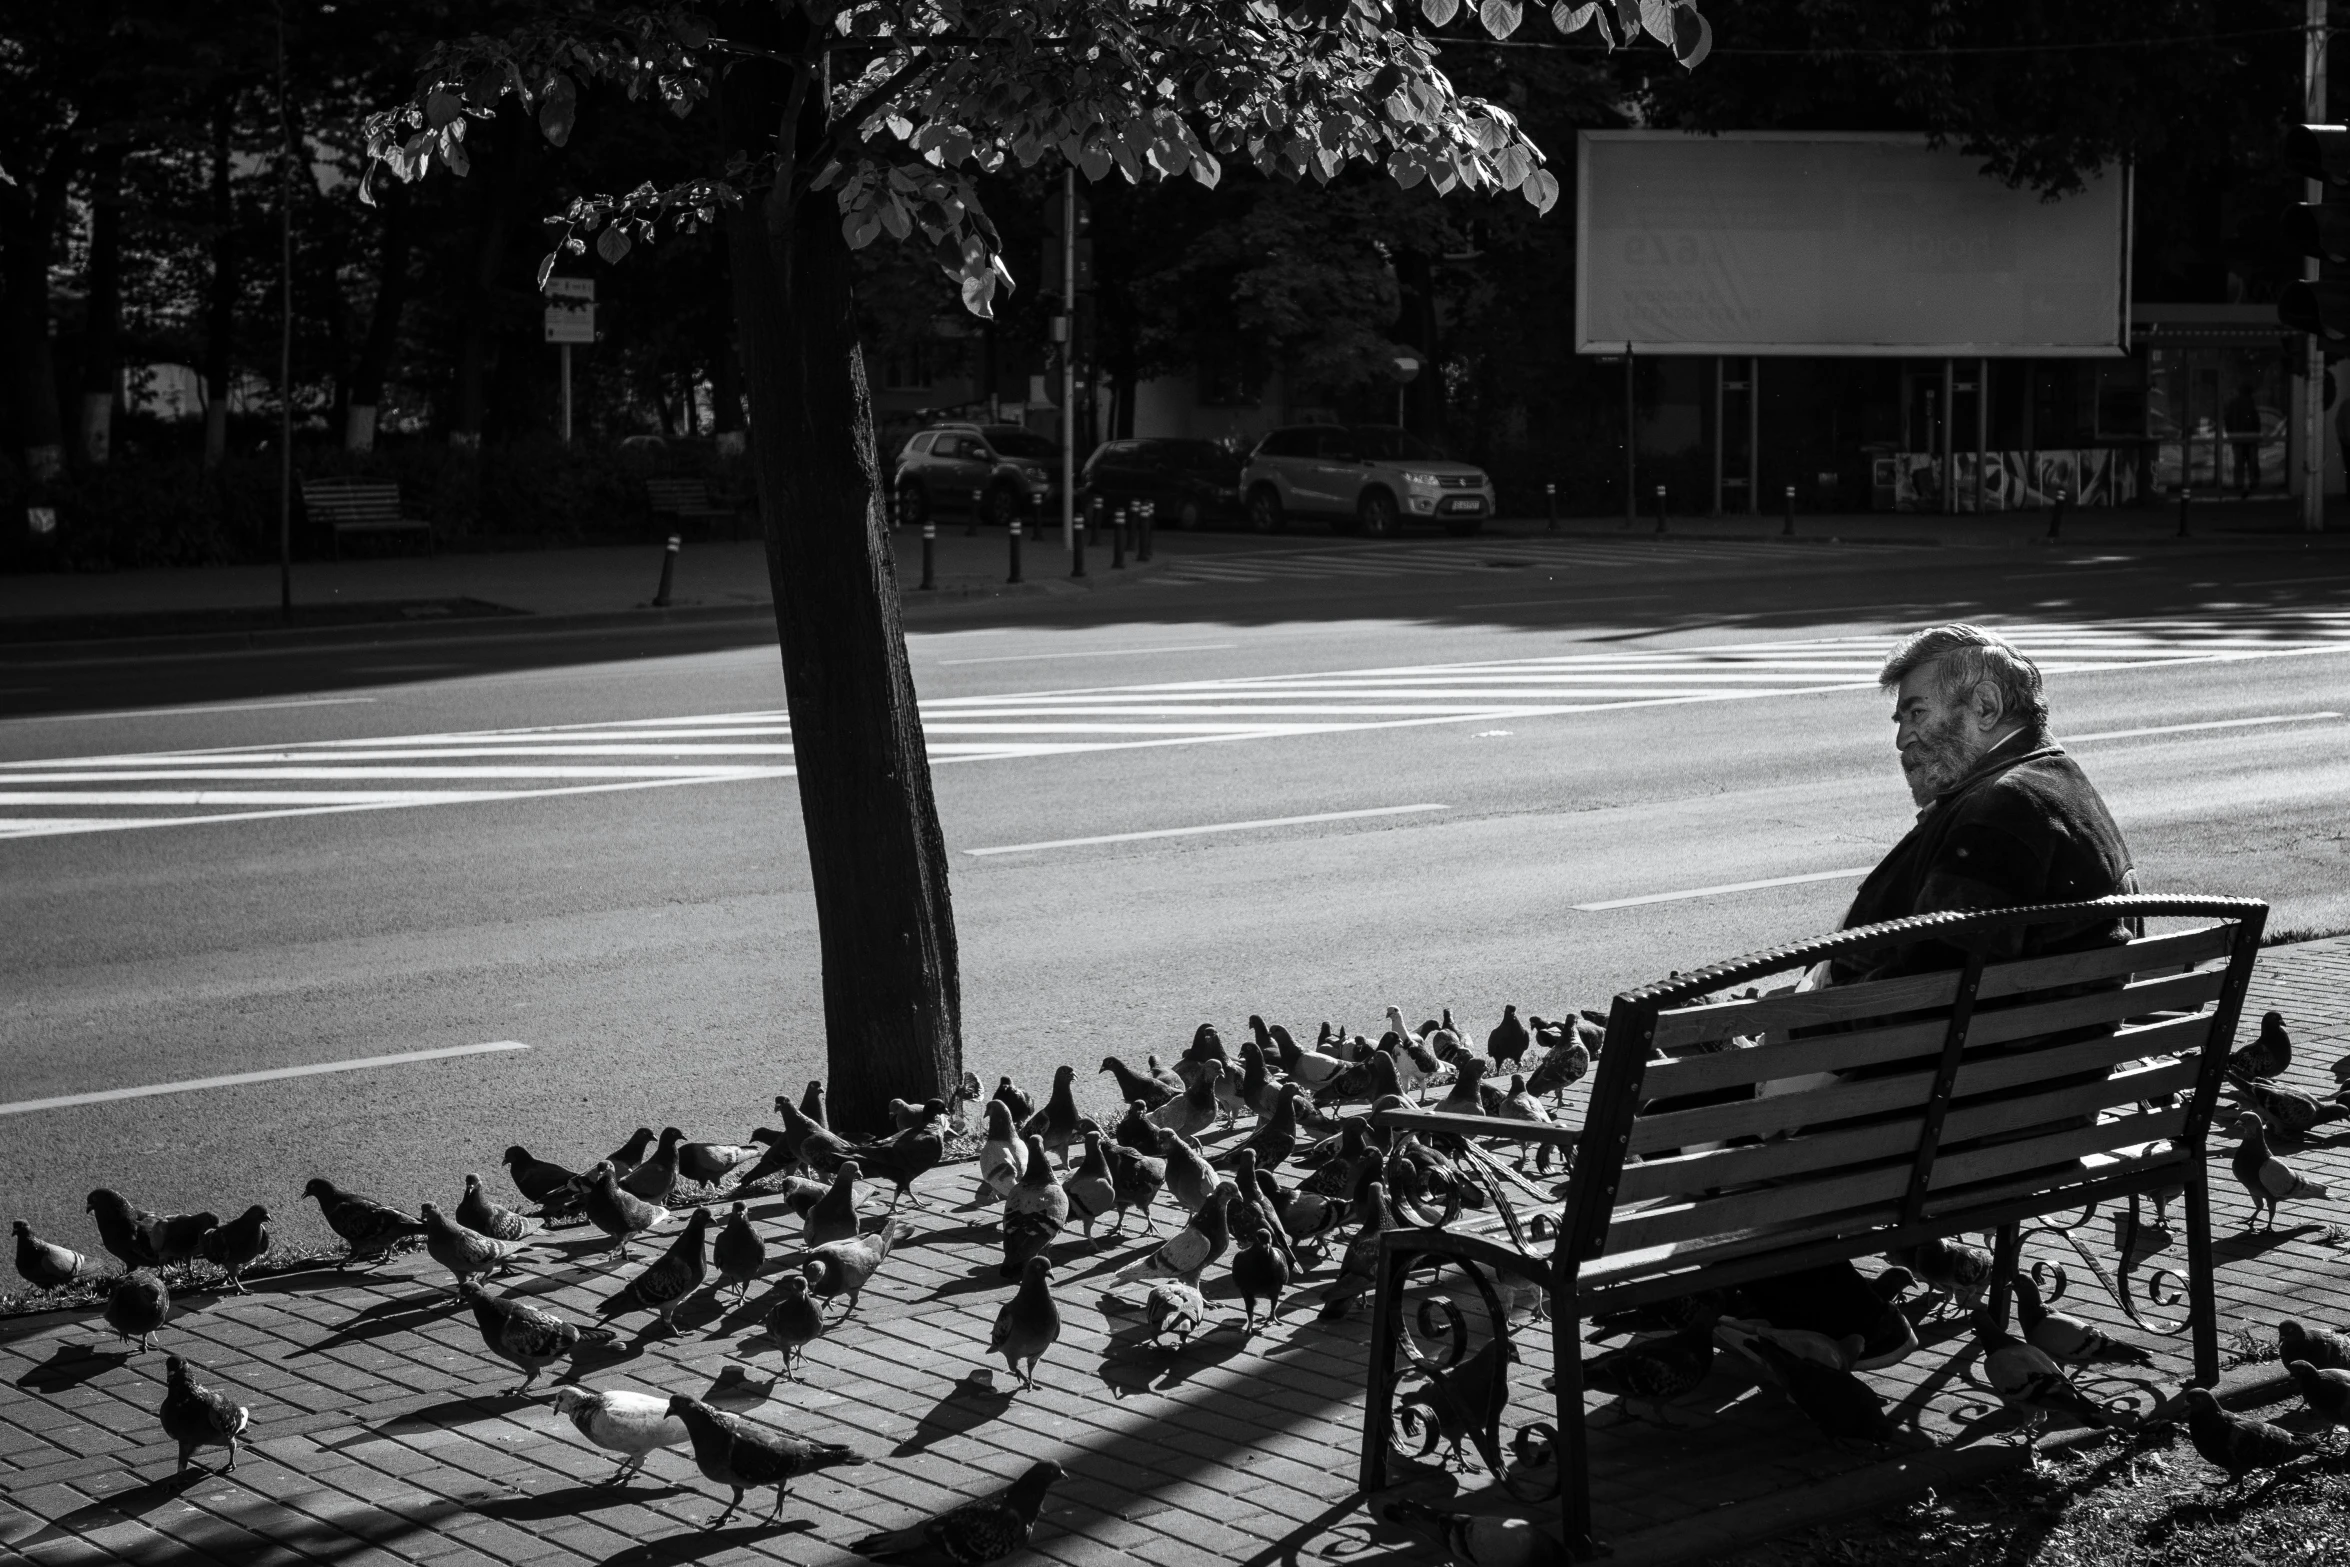 a woman sitting on a bench surrounded by pigeons, a black and white photo, by Joze Ciuha, photo of a man, in the morning light, on sidewalk, birds and trees